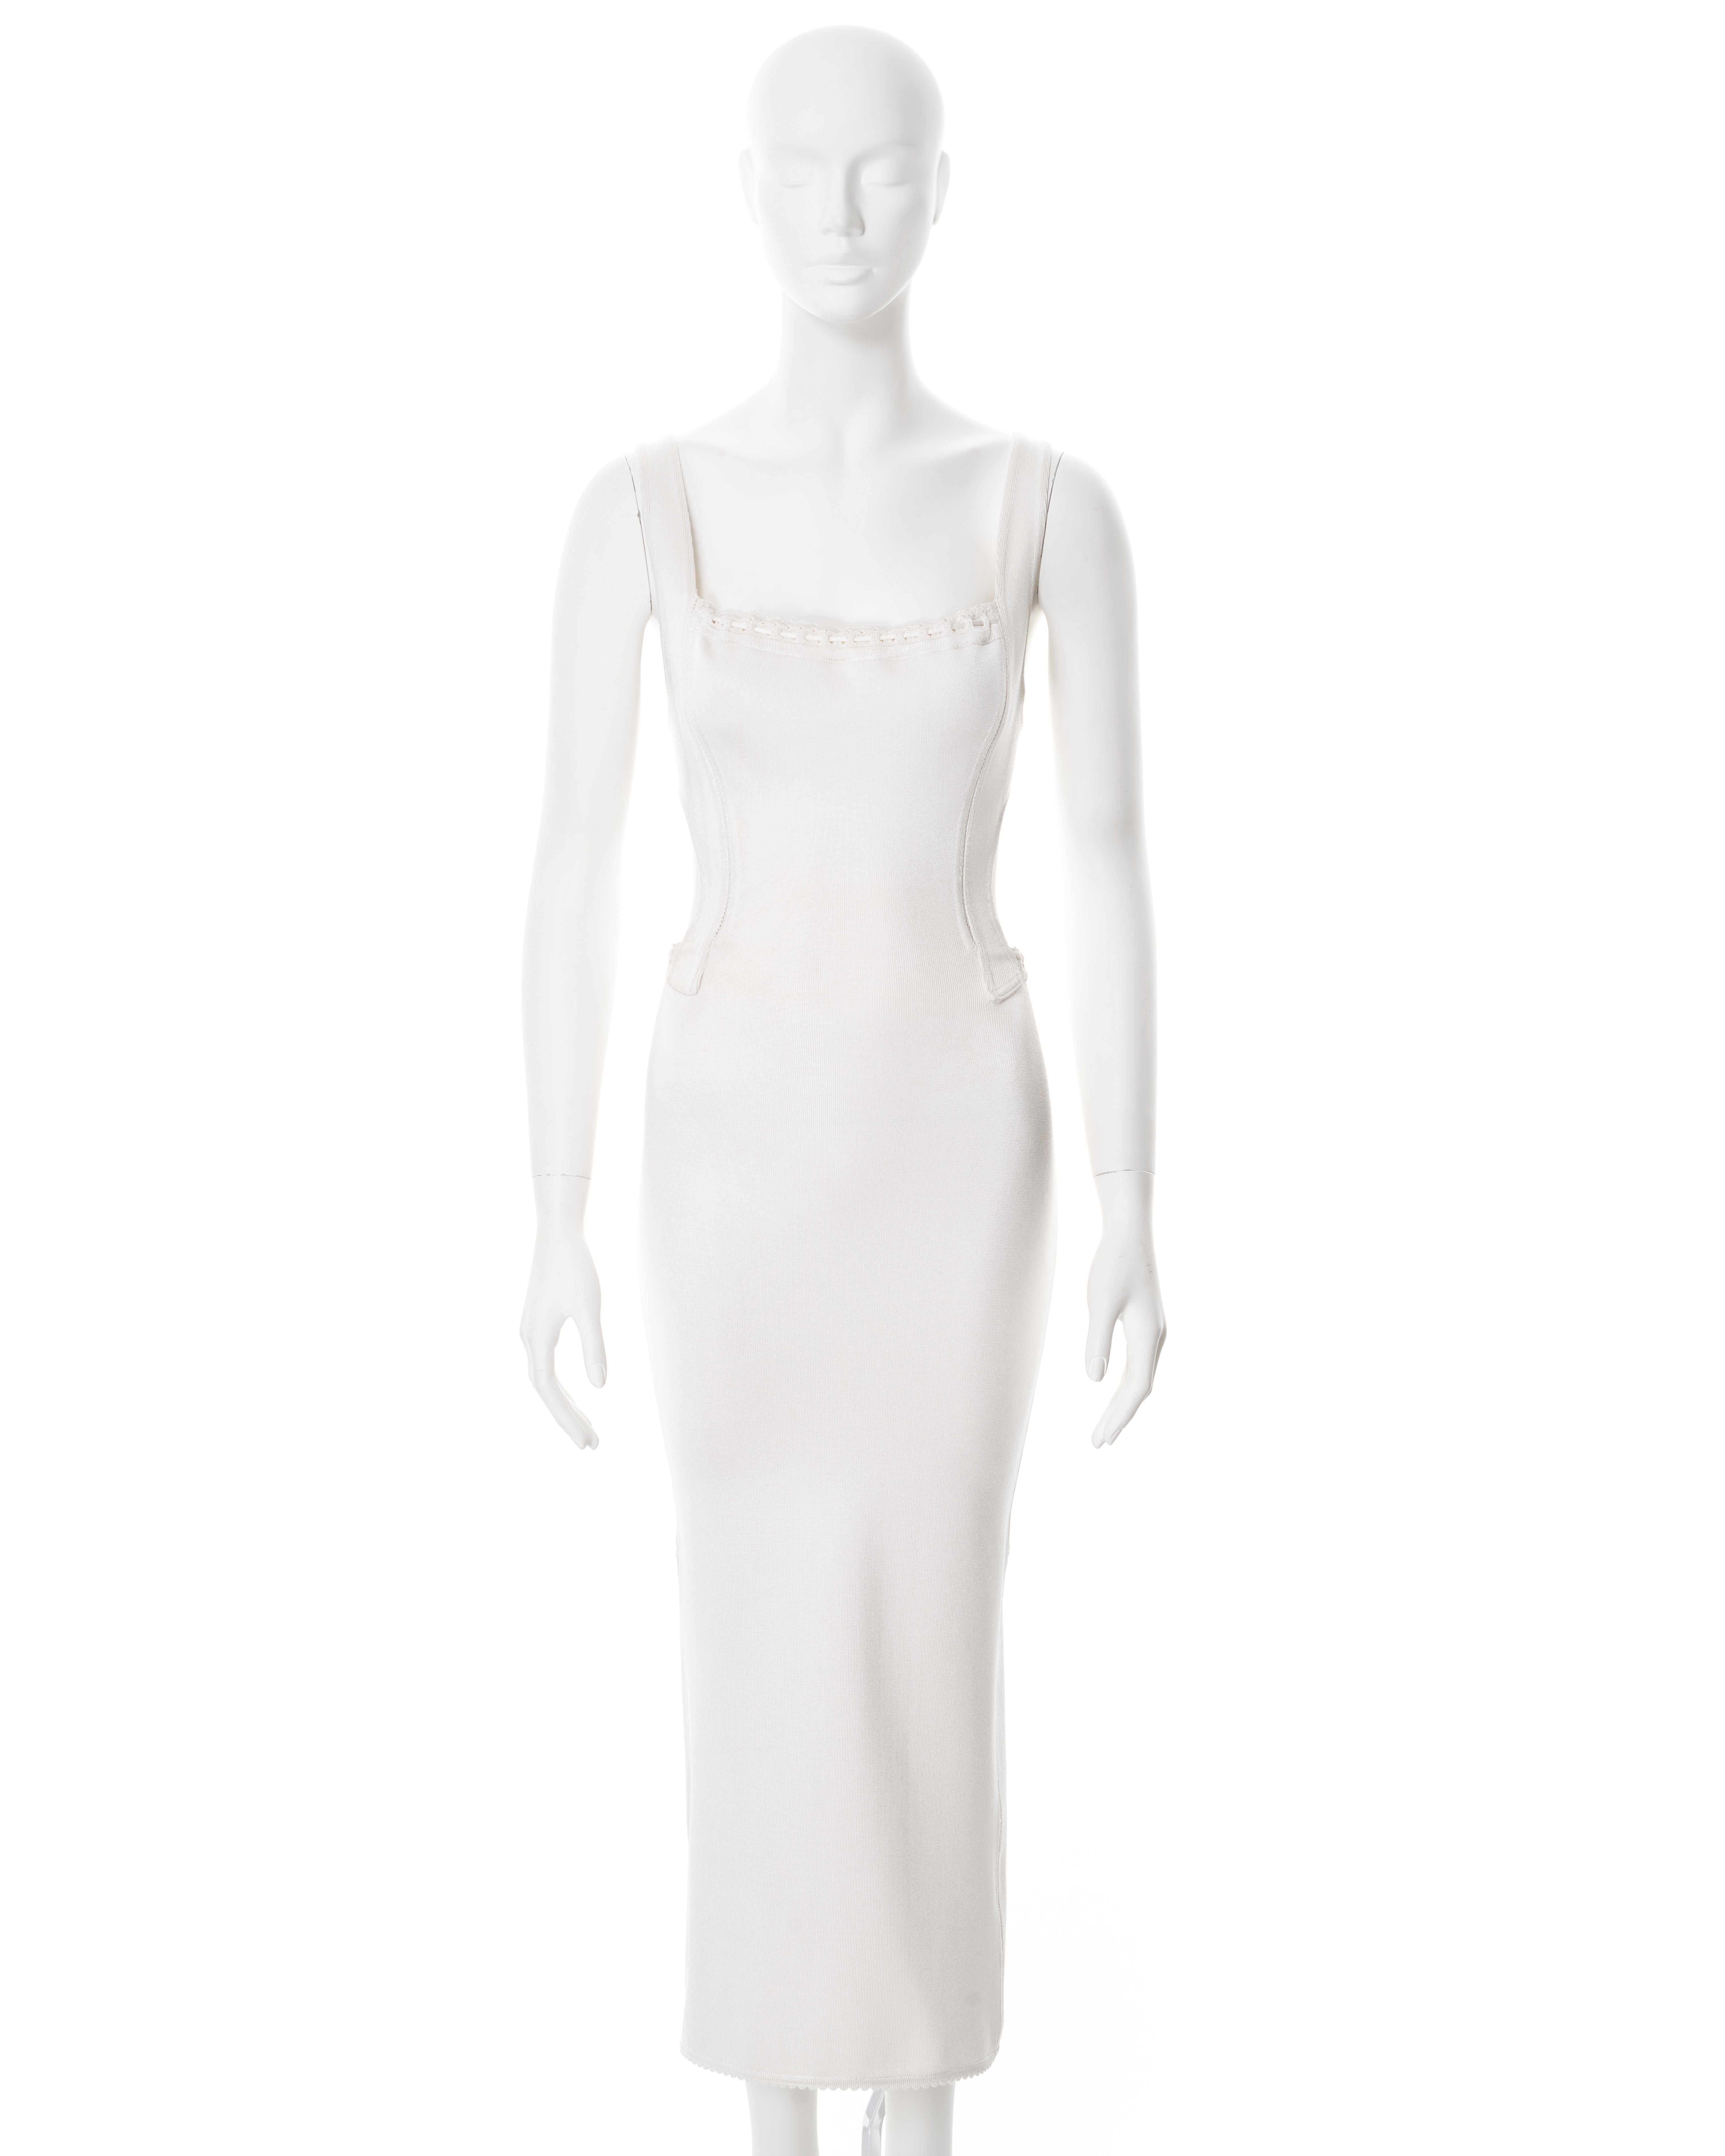 ▪ Azzedine Alaia bodycon dress
▪ Sold by One of a Kind Archive
▪ Spring-Summer 1993
▪ Constructed from white jersey comprising viscose, spandex and nylon 
▪ Open back and sides 
▪ Bodice with bra-style straps 
▪ Calf-length flared skirt 
▪ Size